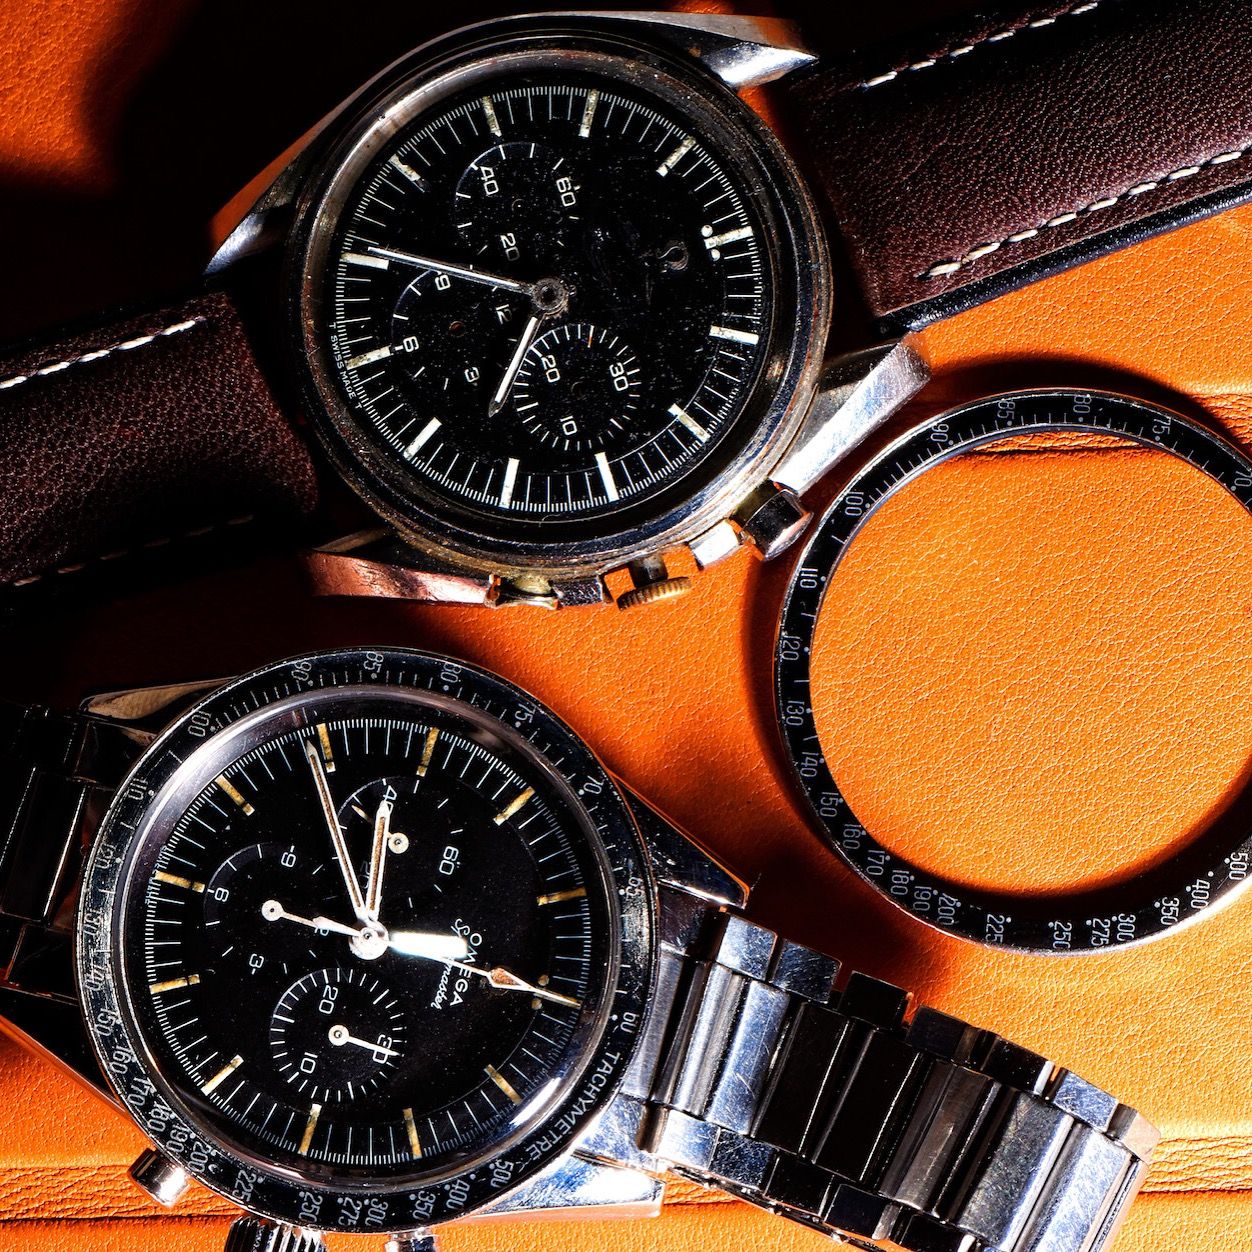 Why I Wrote 100 Articles Before Covering The Speedmaster